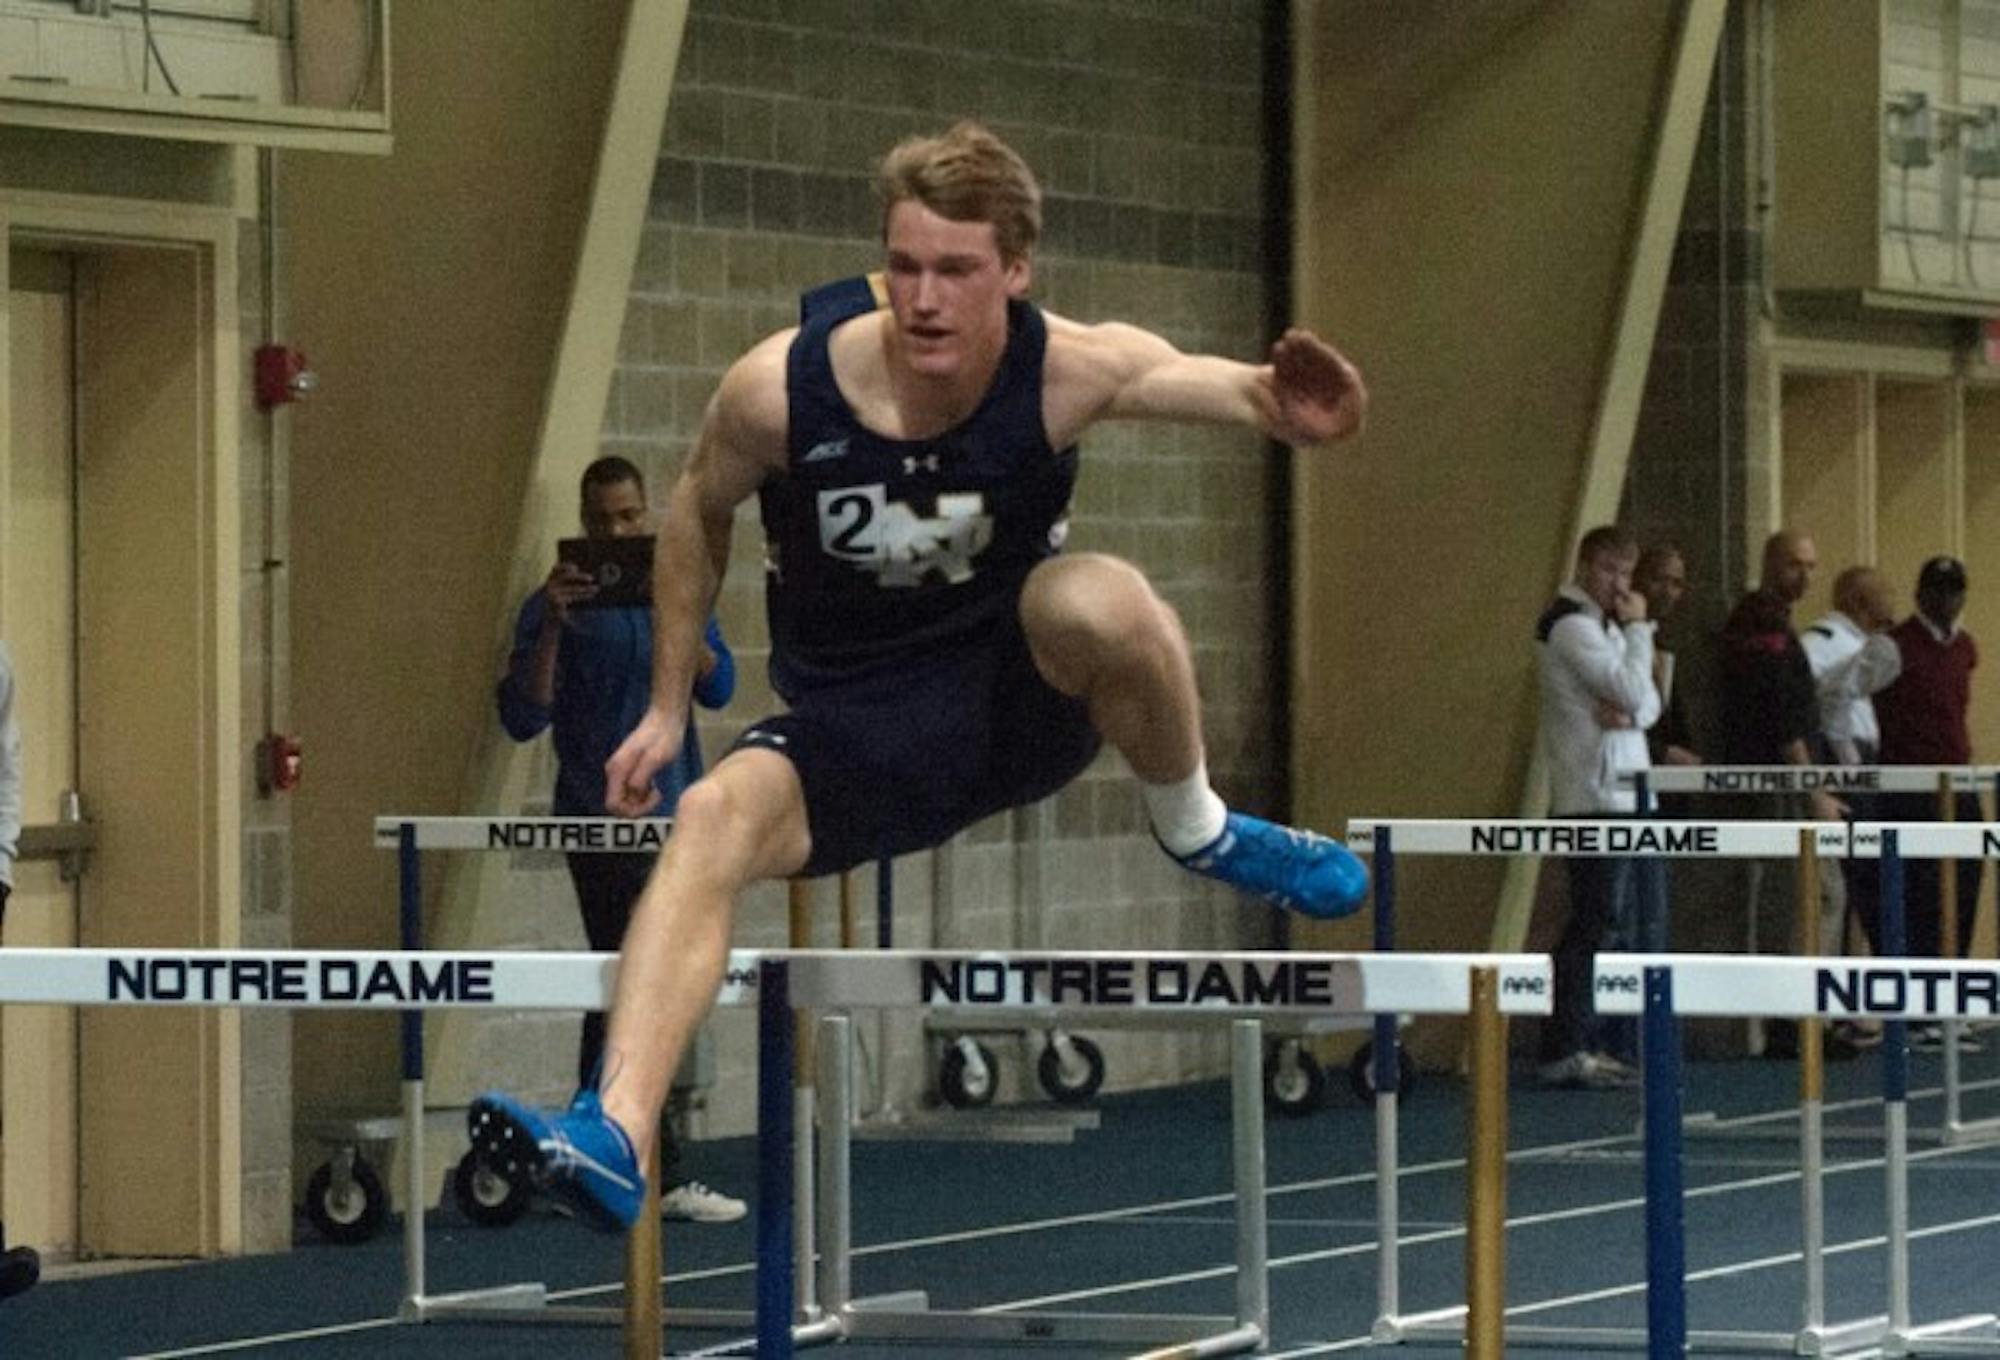 Sophomore Hunter Holton competes in the Notre Dame Invitational on Jan. 24 at Loftus Sports Center. Holton won the men’s high jump in Friday’s Blue and Gold Invitational at home.